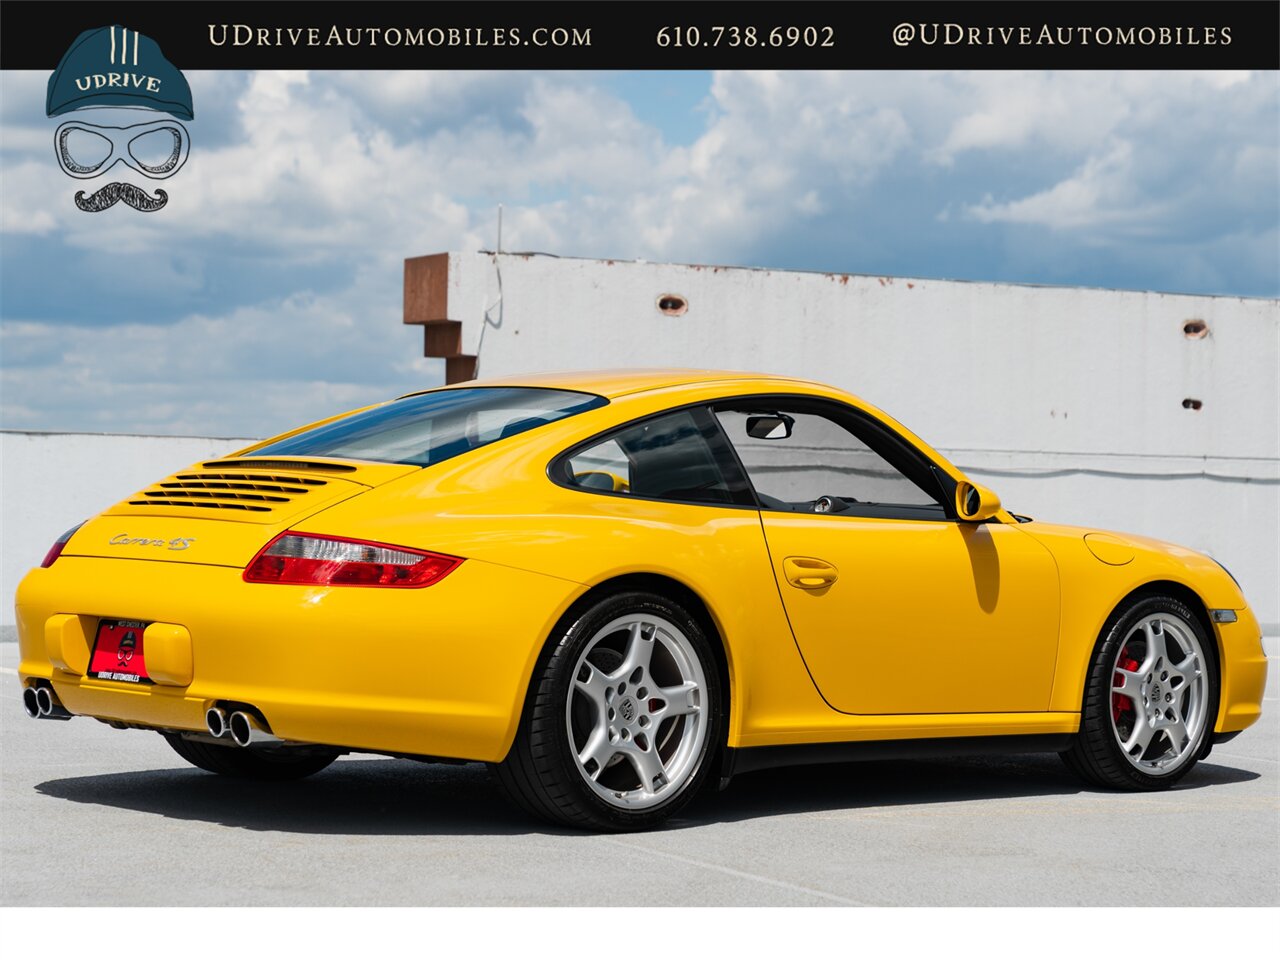 2006 Porsche 911 Carrera 4S  997 C4S 6 Speed Cocoa Full Lthr Chrono Sport Exhaust Special Color Combo - Photo 19 - West Chester, PA 19382